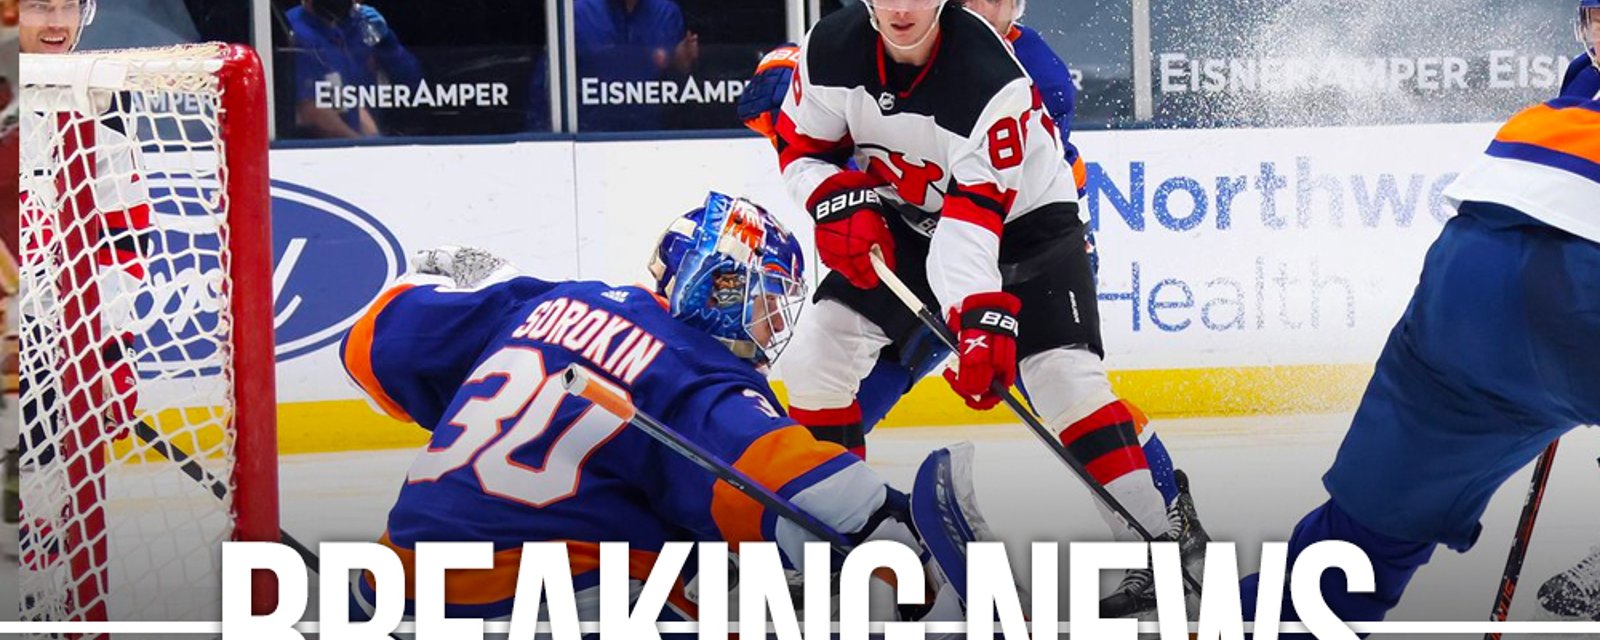 Breaking: Tonight's game between the Islanders and Devils has been cancelled